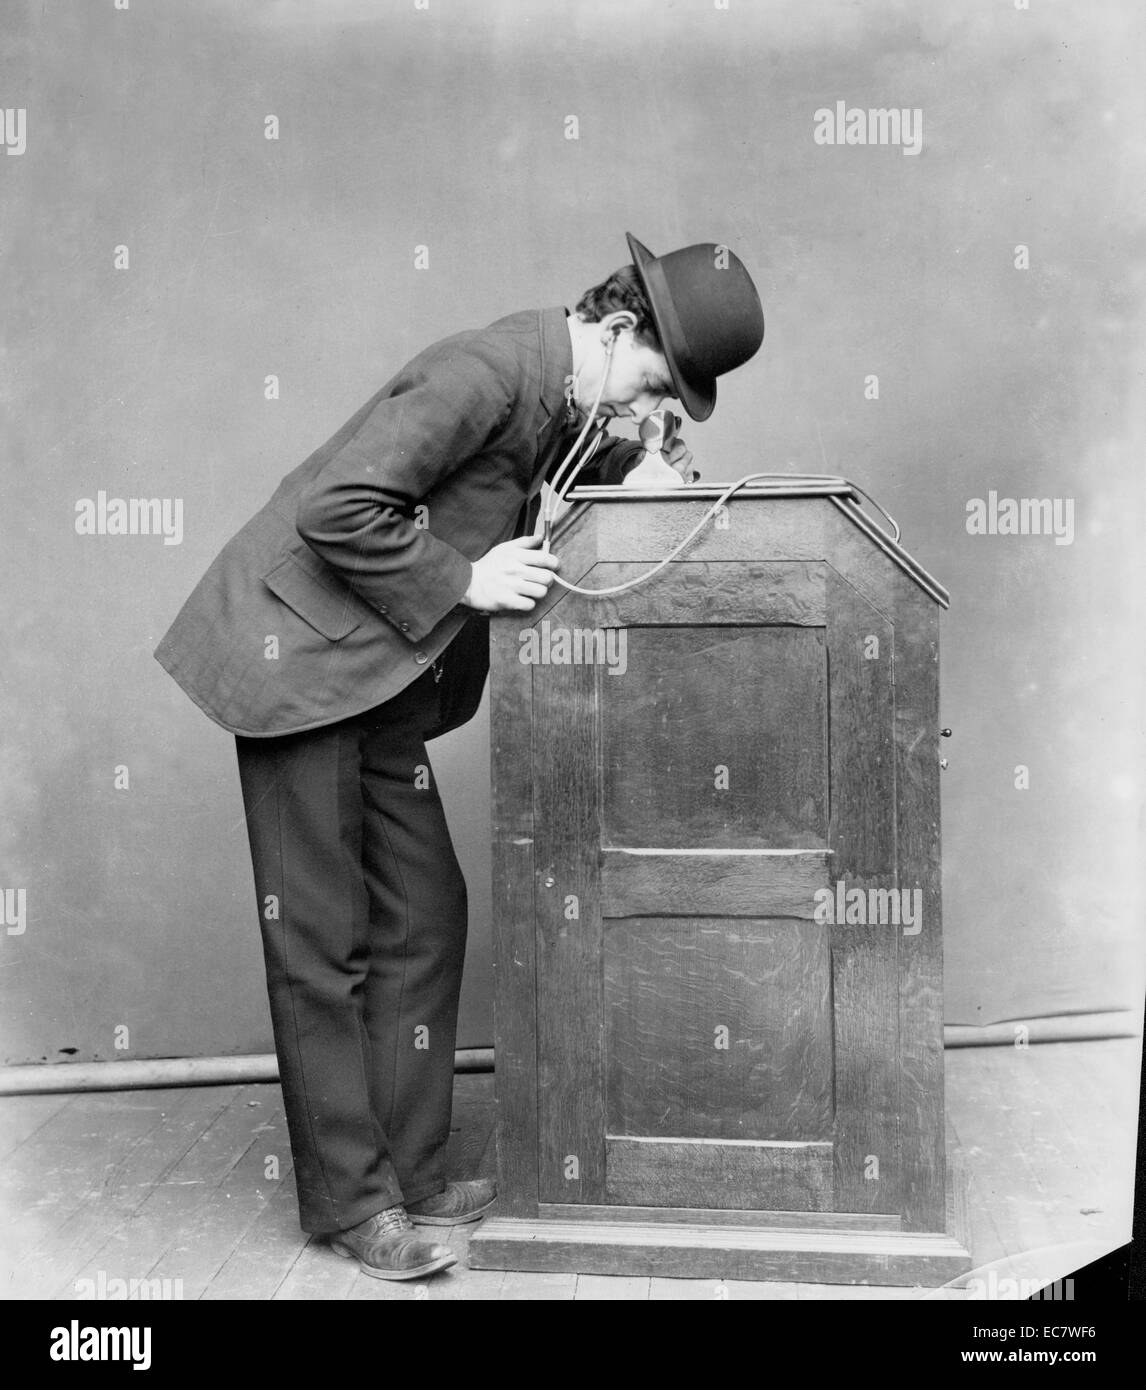 Albert Einstein's Kinetoscope Arcade. The kinetoscope was an early motion picture exhibition device that allowed films to be viewed by one person at a time through a peephole viewer window on top. This was the basic model for later movie projections. Stock Photo